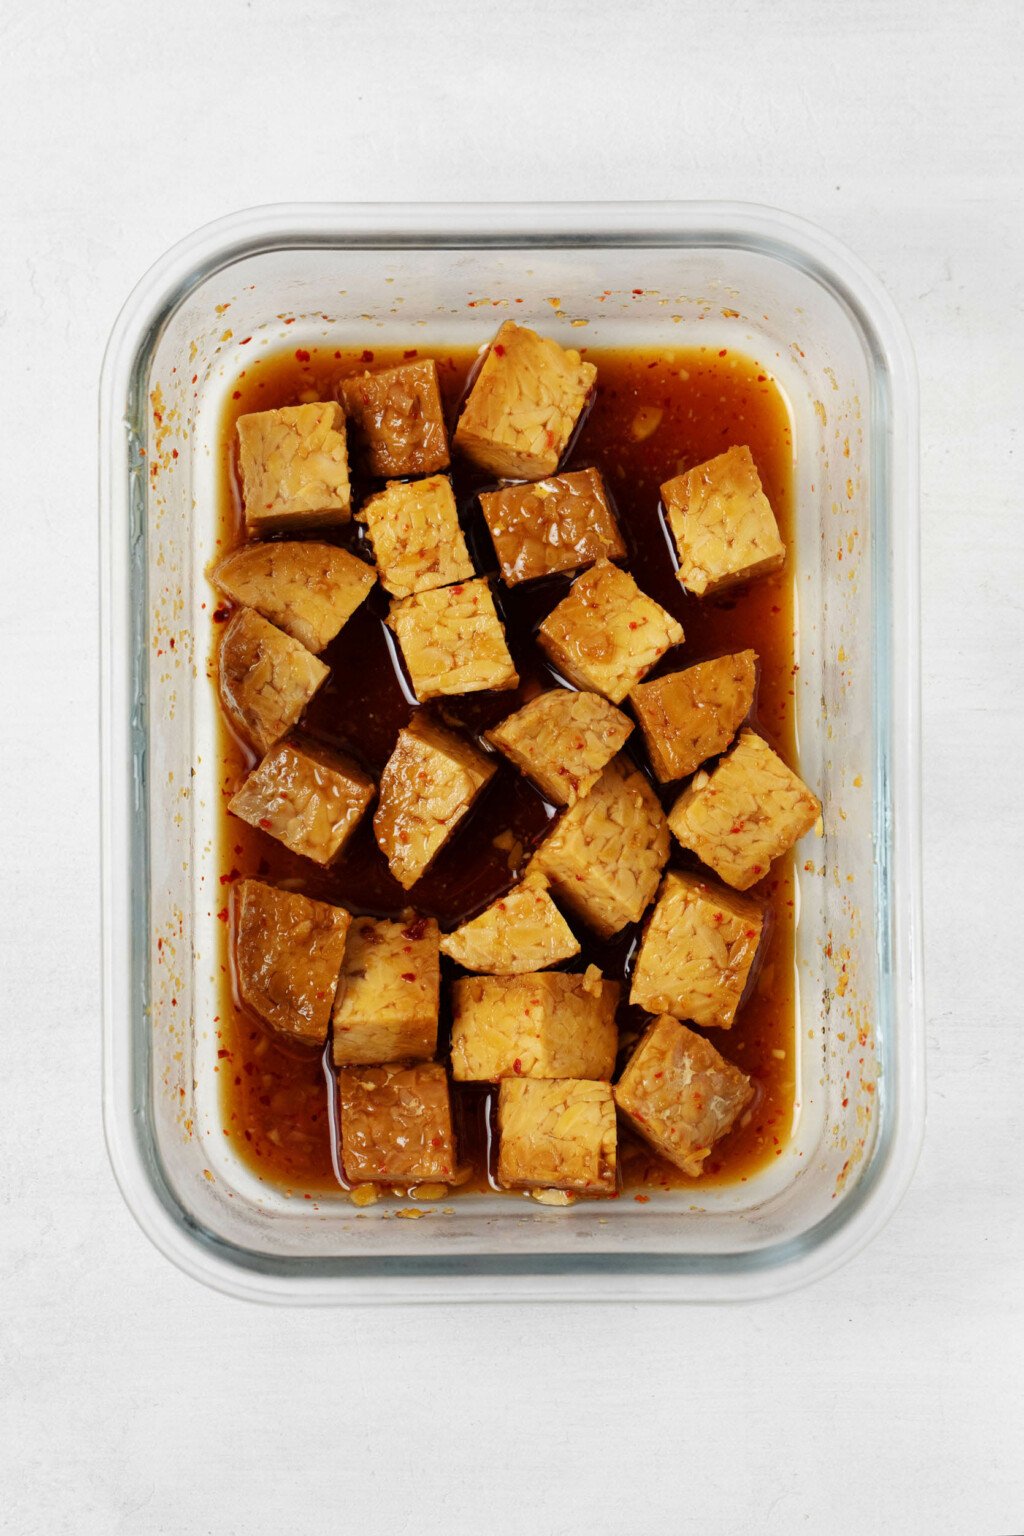 A clear, rectangular storage dish holds pieces of tempeh mixed with a dark colored sauce.